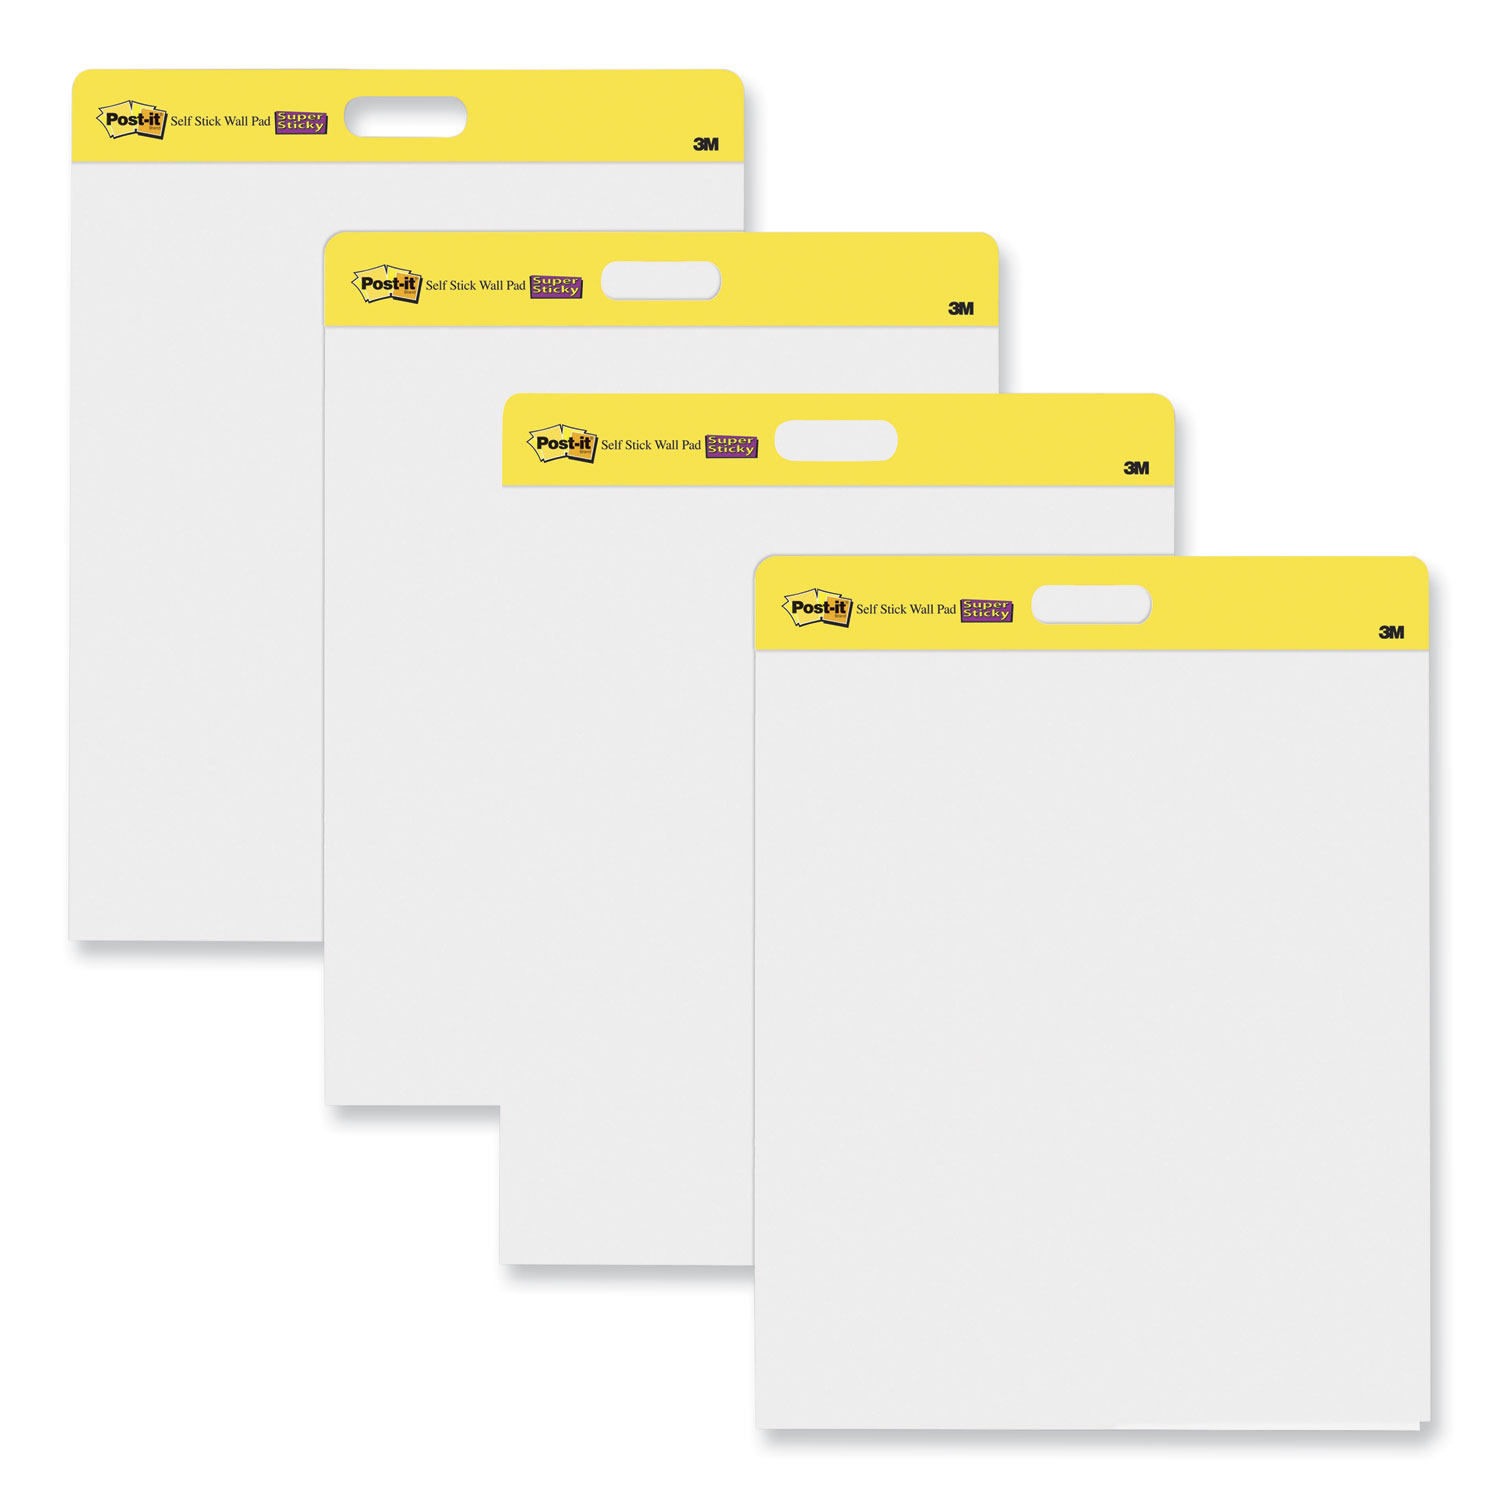  Post-it Super Sticky Easel Pad, 25 in x 30 in, White, 30  Sheets/Pad, 2 Pad/Pack, Large White Premium Self Stick Flip Chart Paper,  Super Sticking Power (559) : Post It